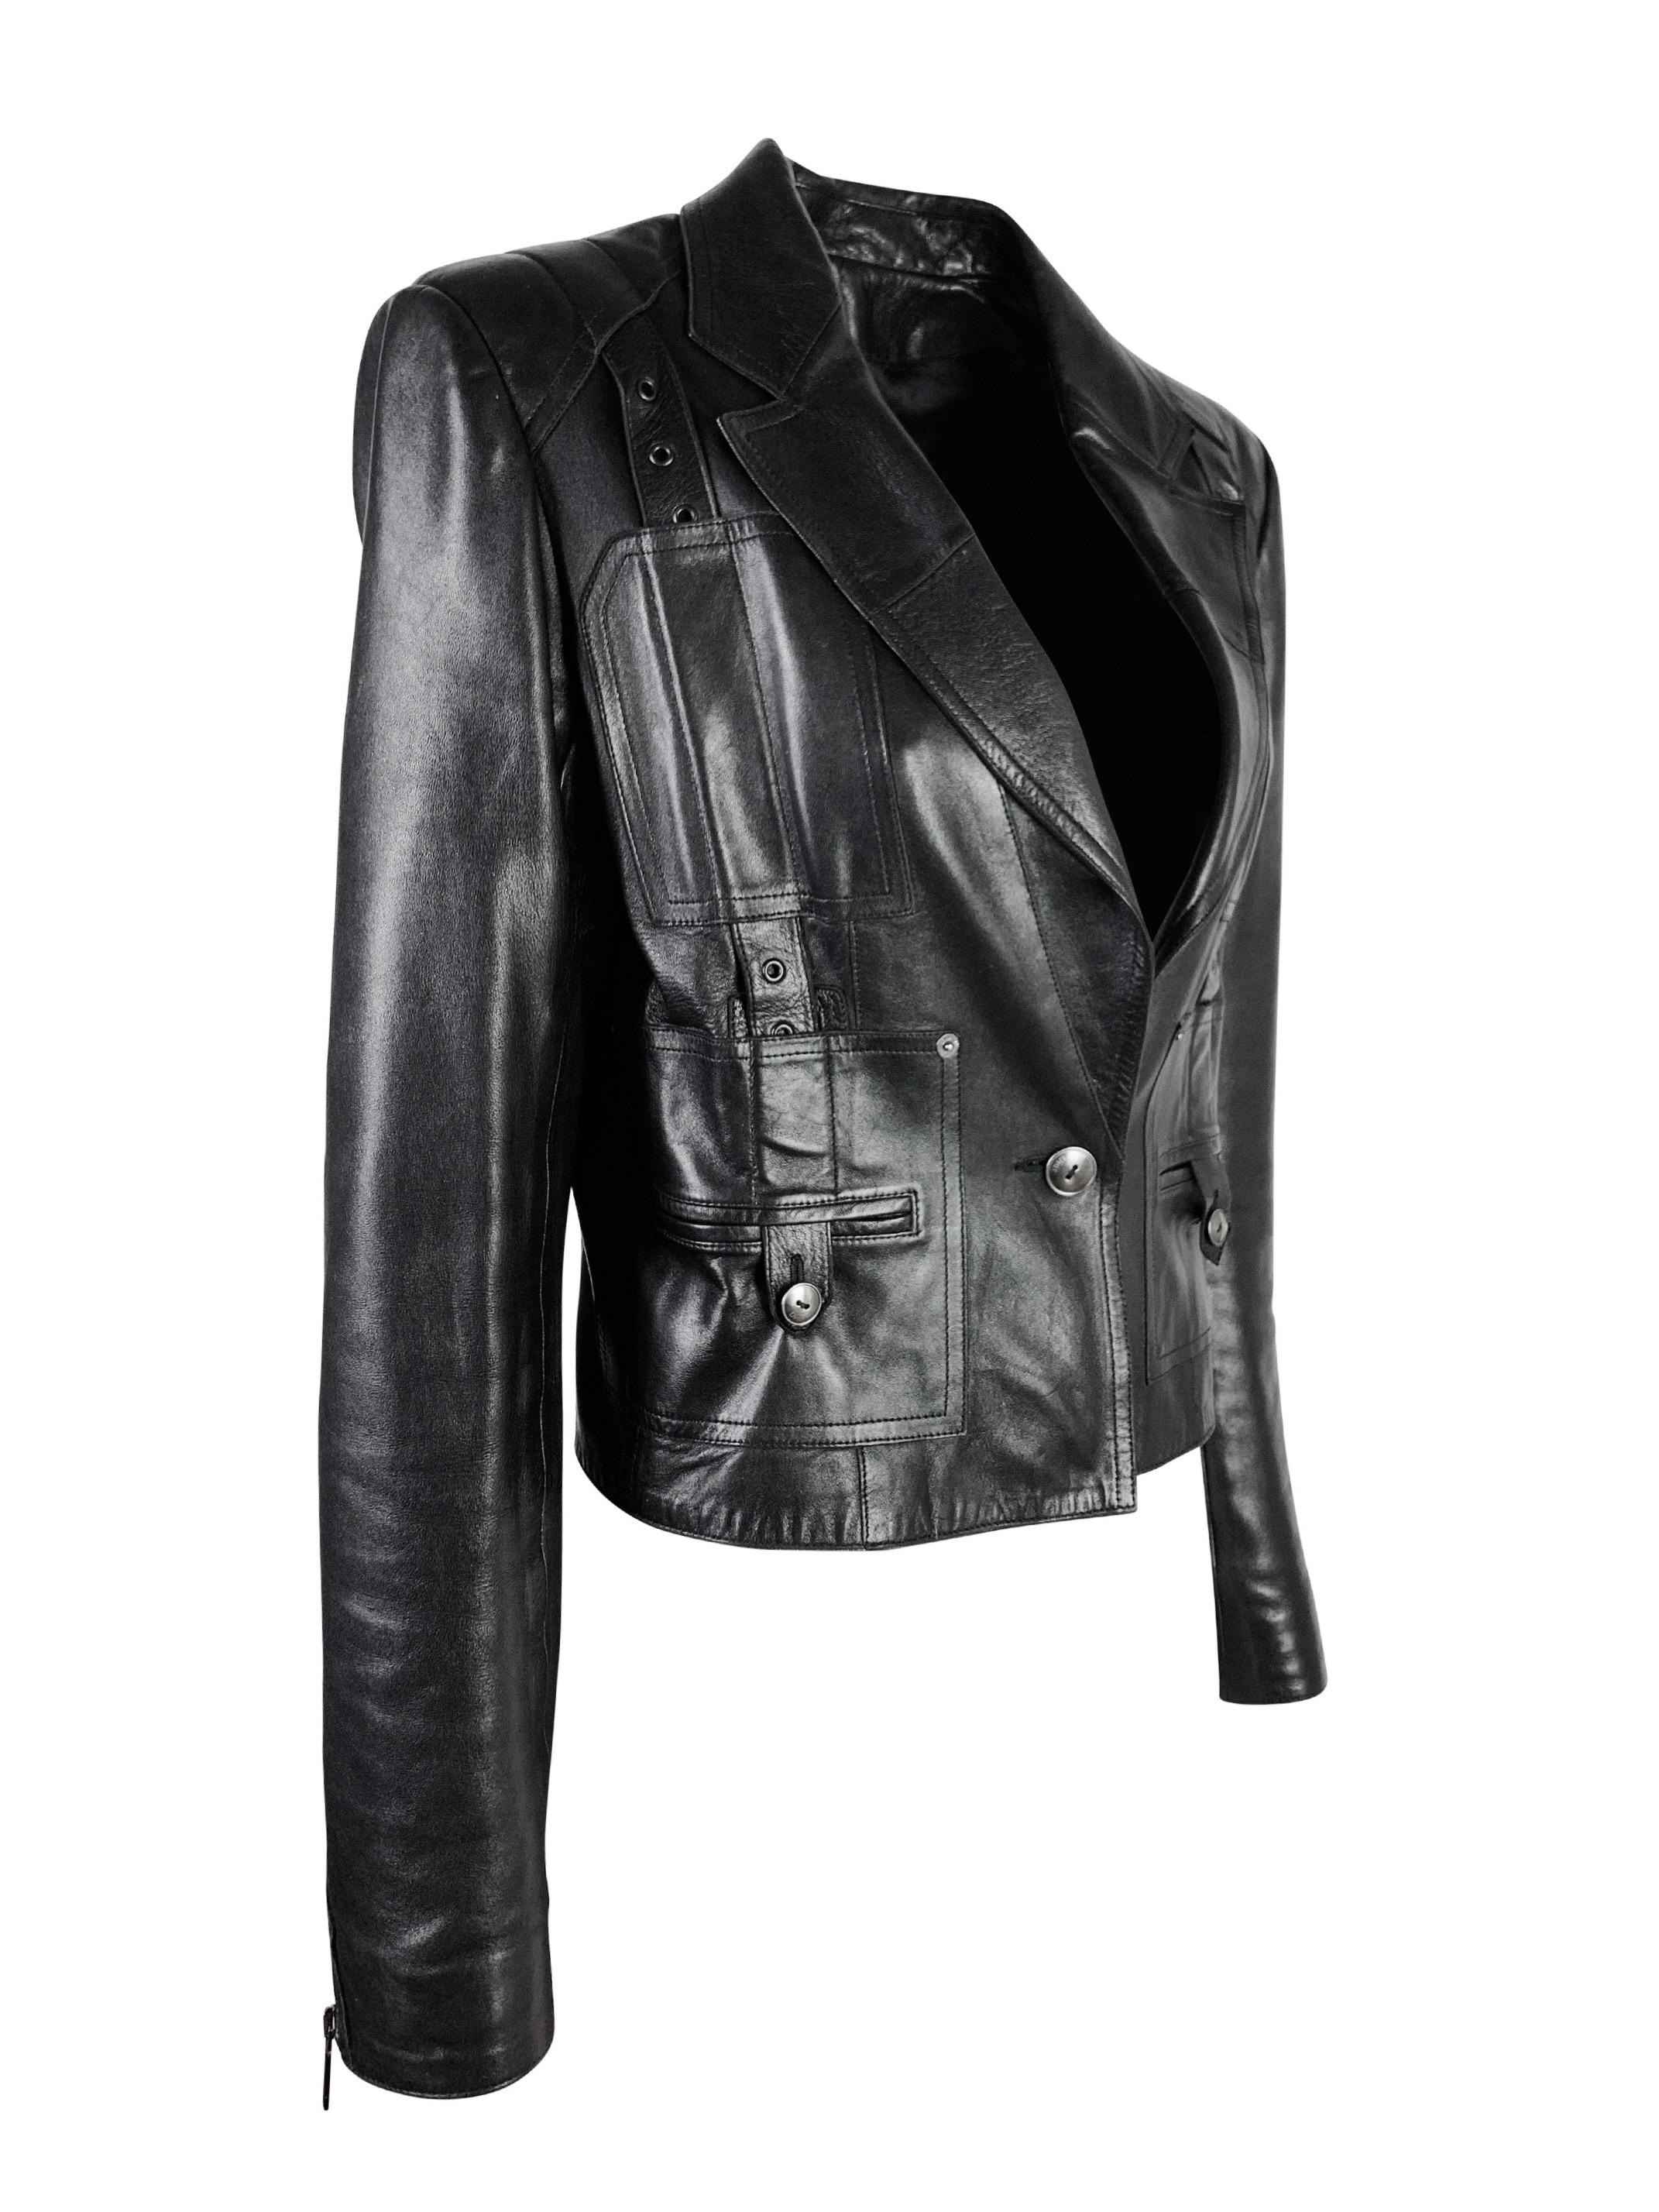 Women's Dior Fall 2003 RTW Leather Jacket